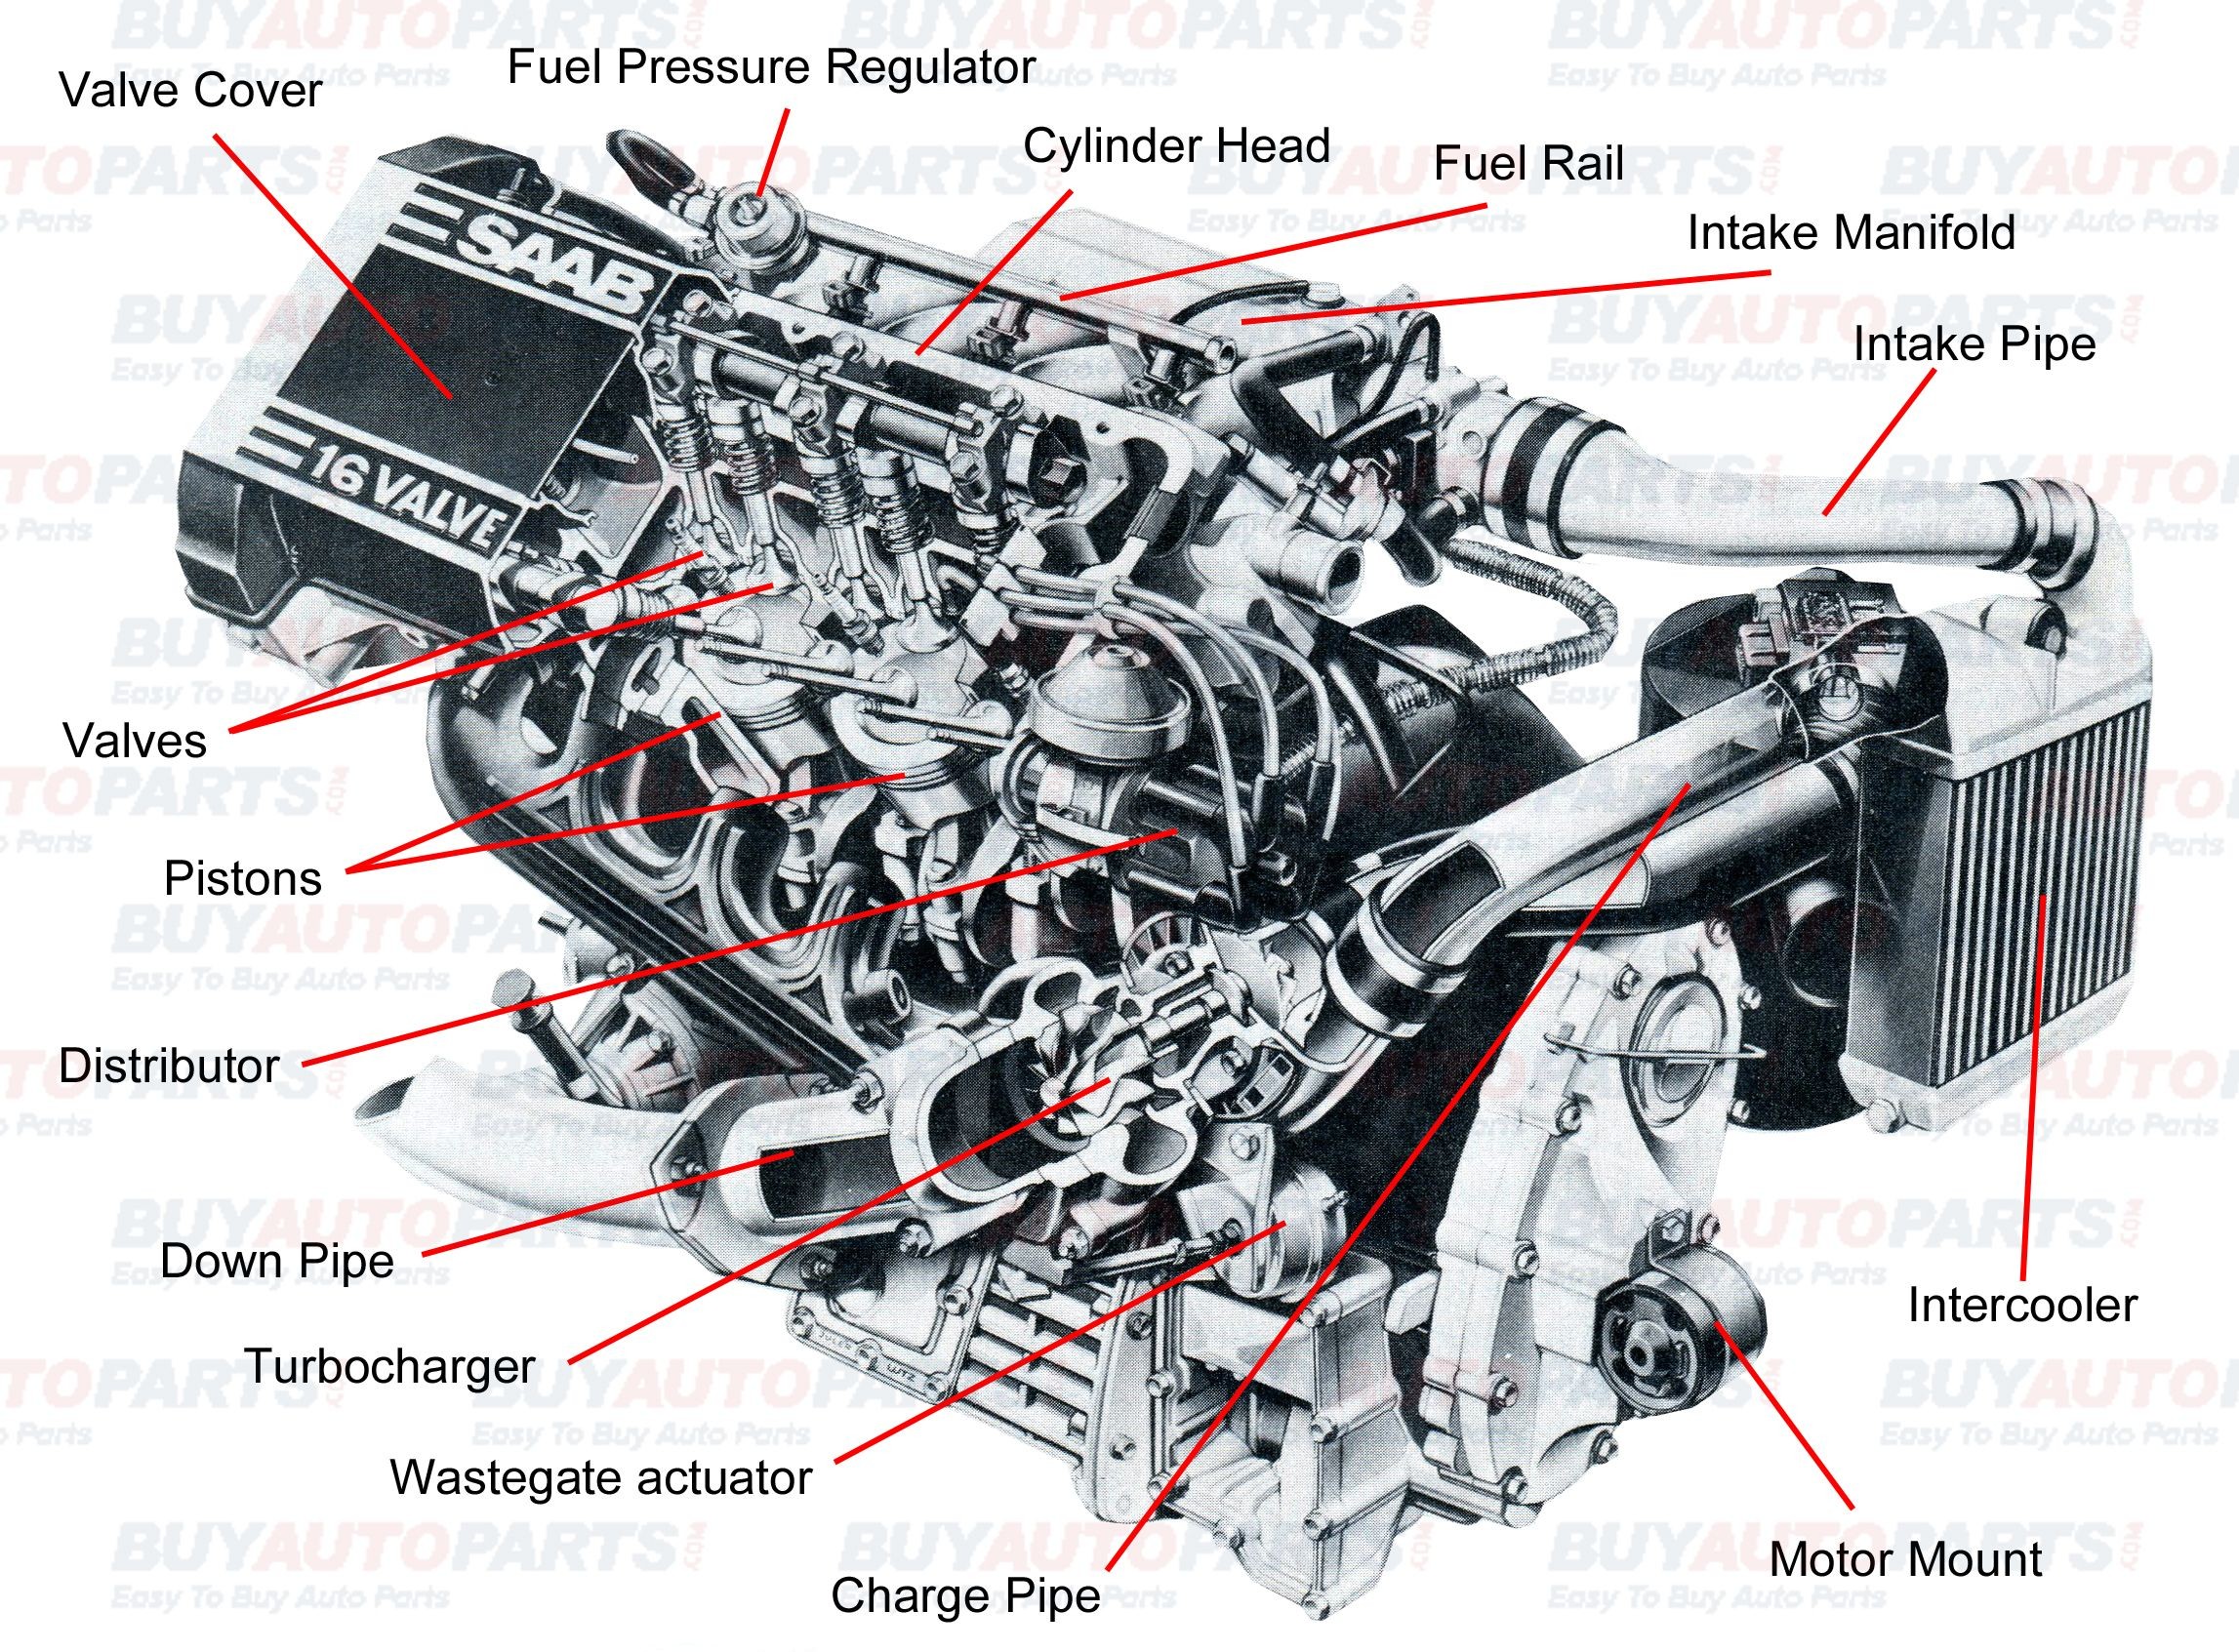 Pushrod Engine Diagram Pin by Jimmiejanet Testellamwfz On What Does An Engine with Turbo Of Pushrod Engine Diagram